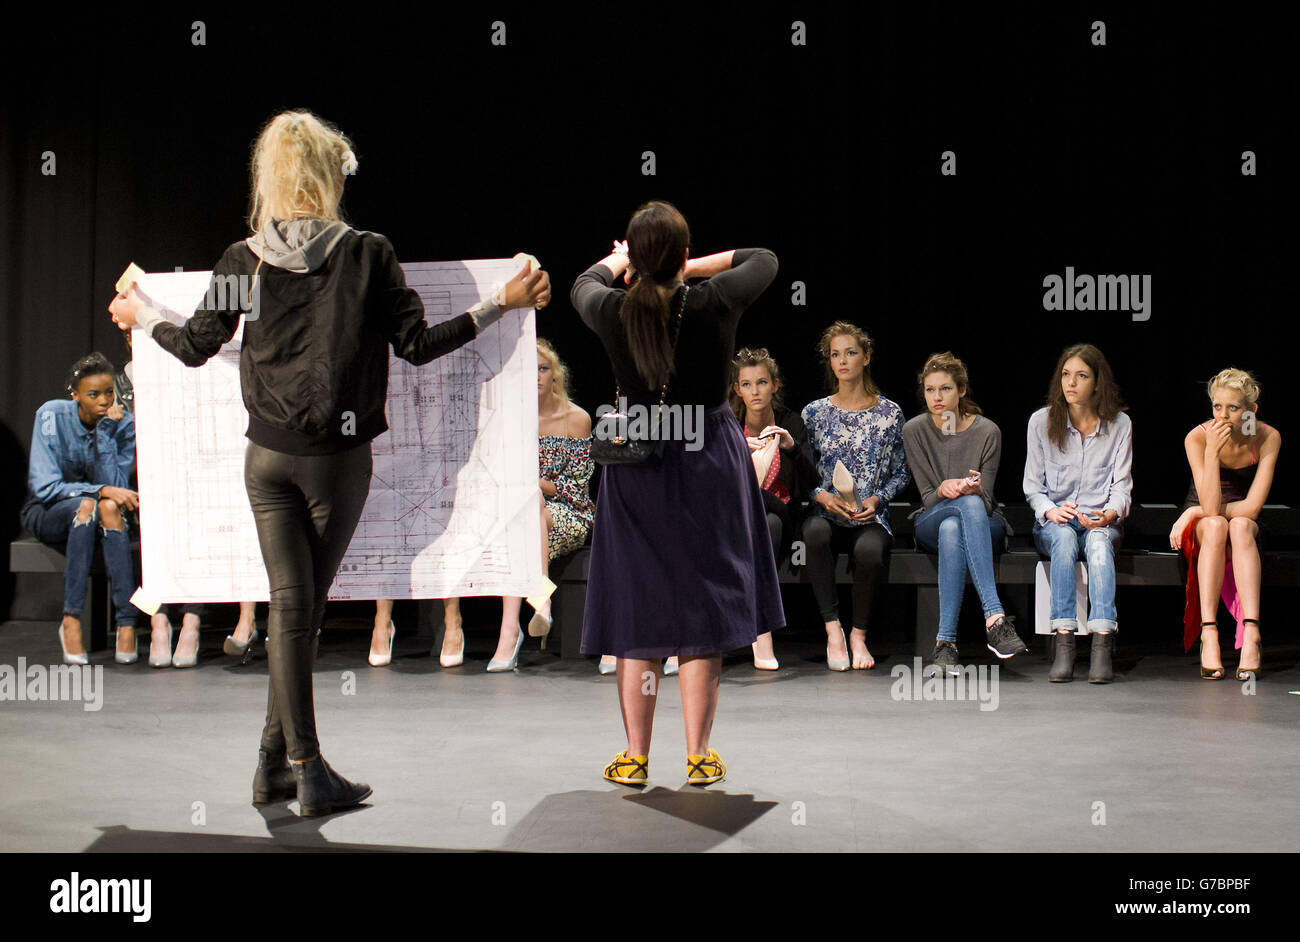 Models are instructed how to walk along the catwalk before the Emilio de la Morena catwalk show on 16 September 2014, during London Fashion Week. Stock Photo